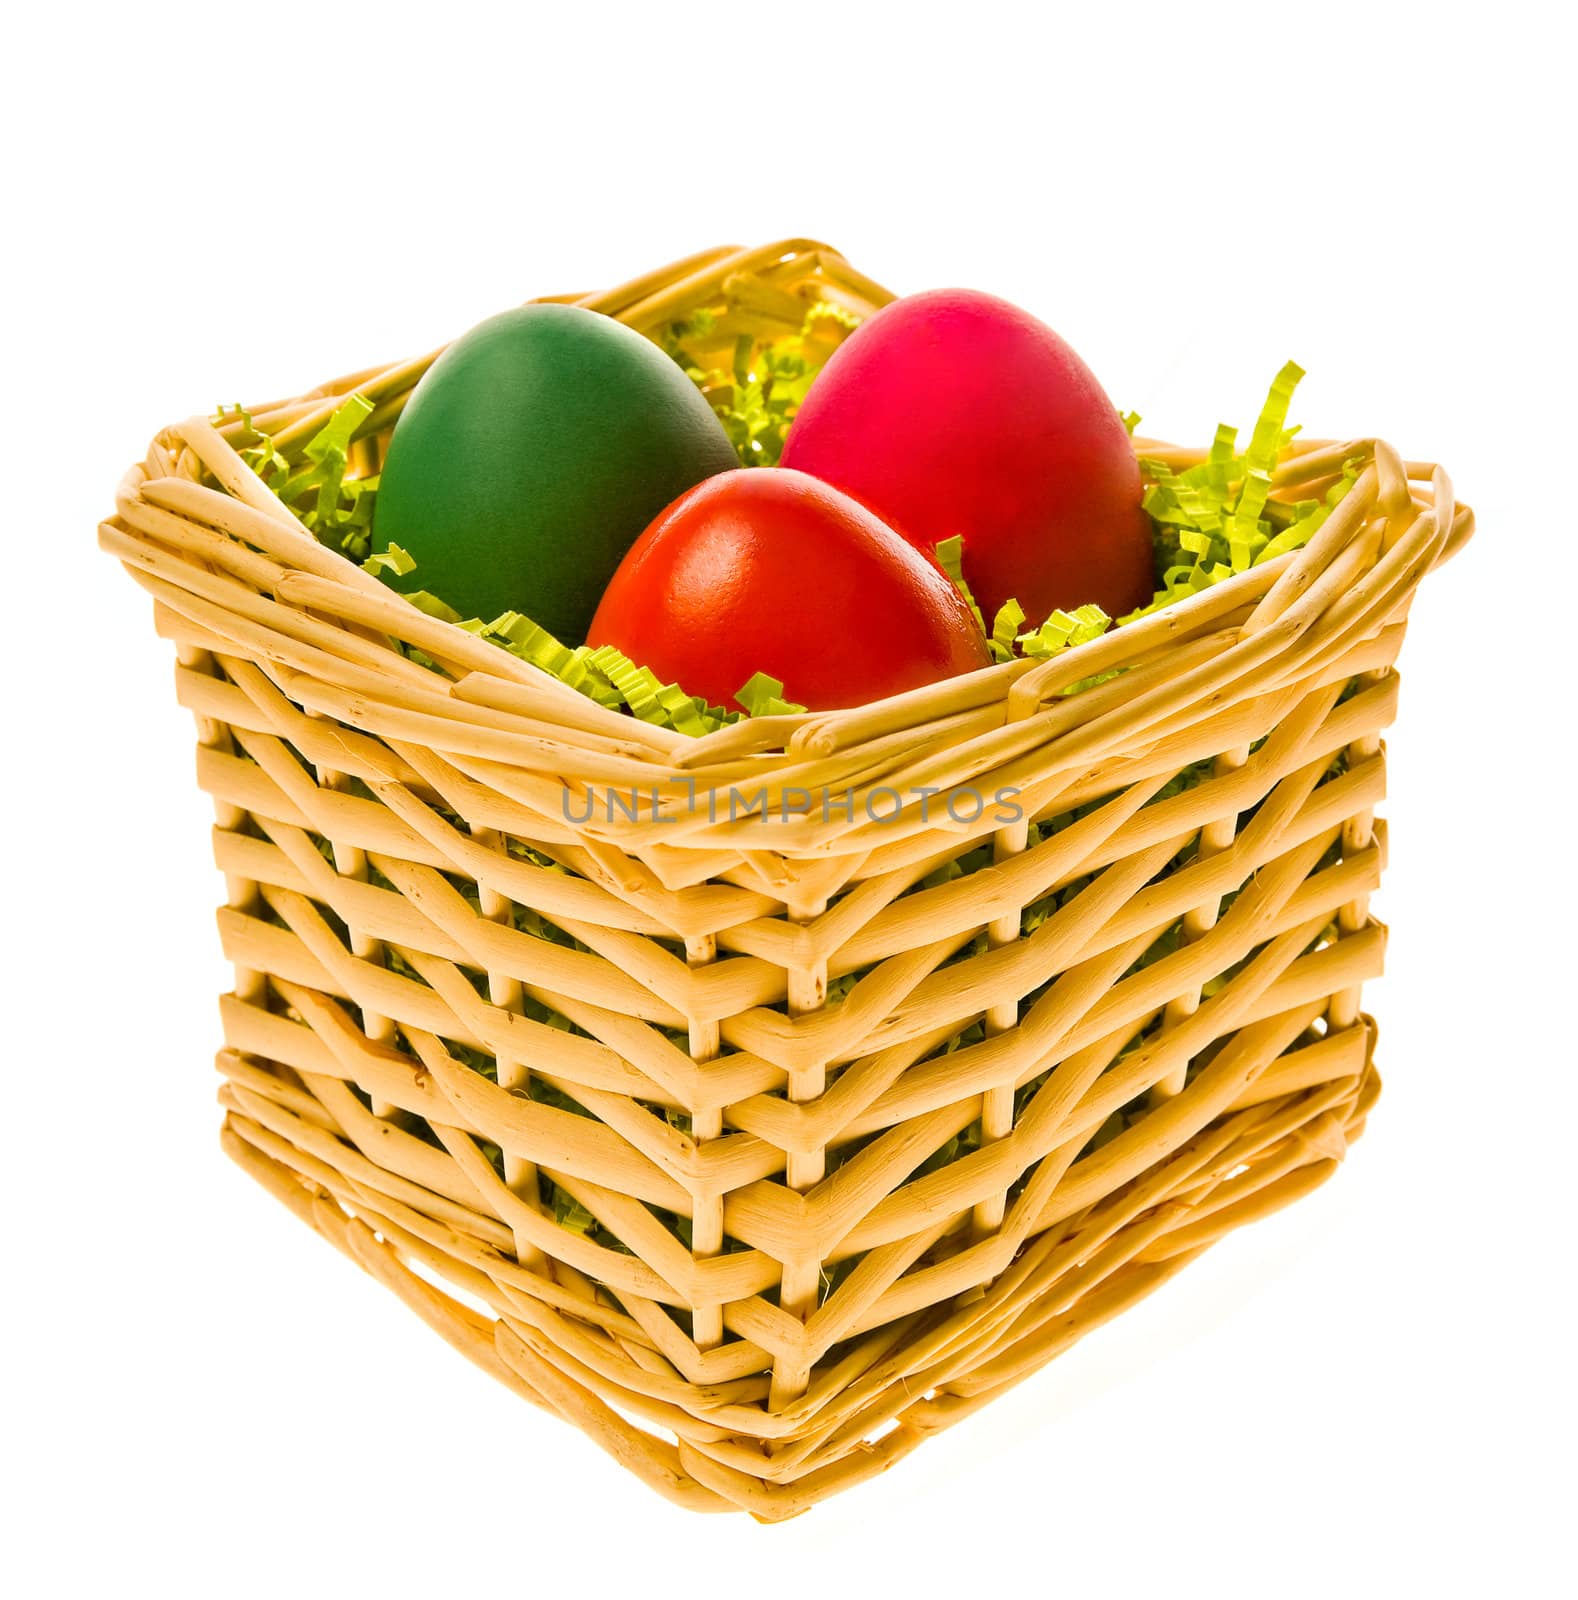 Small basket with multi-coloured Easter eggs
